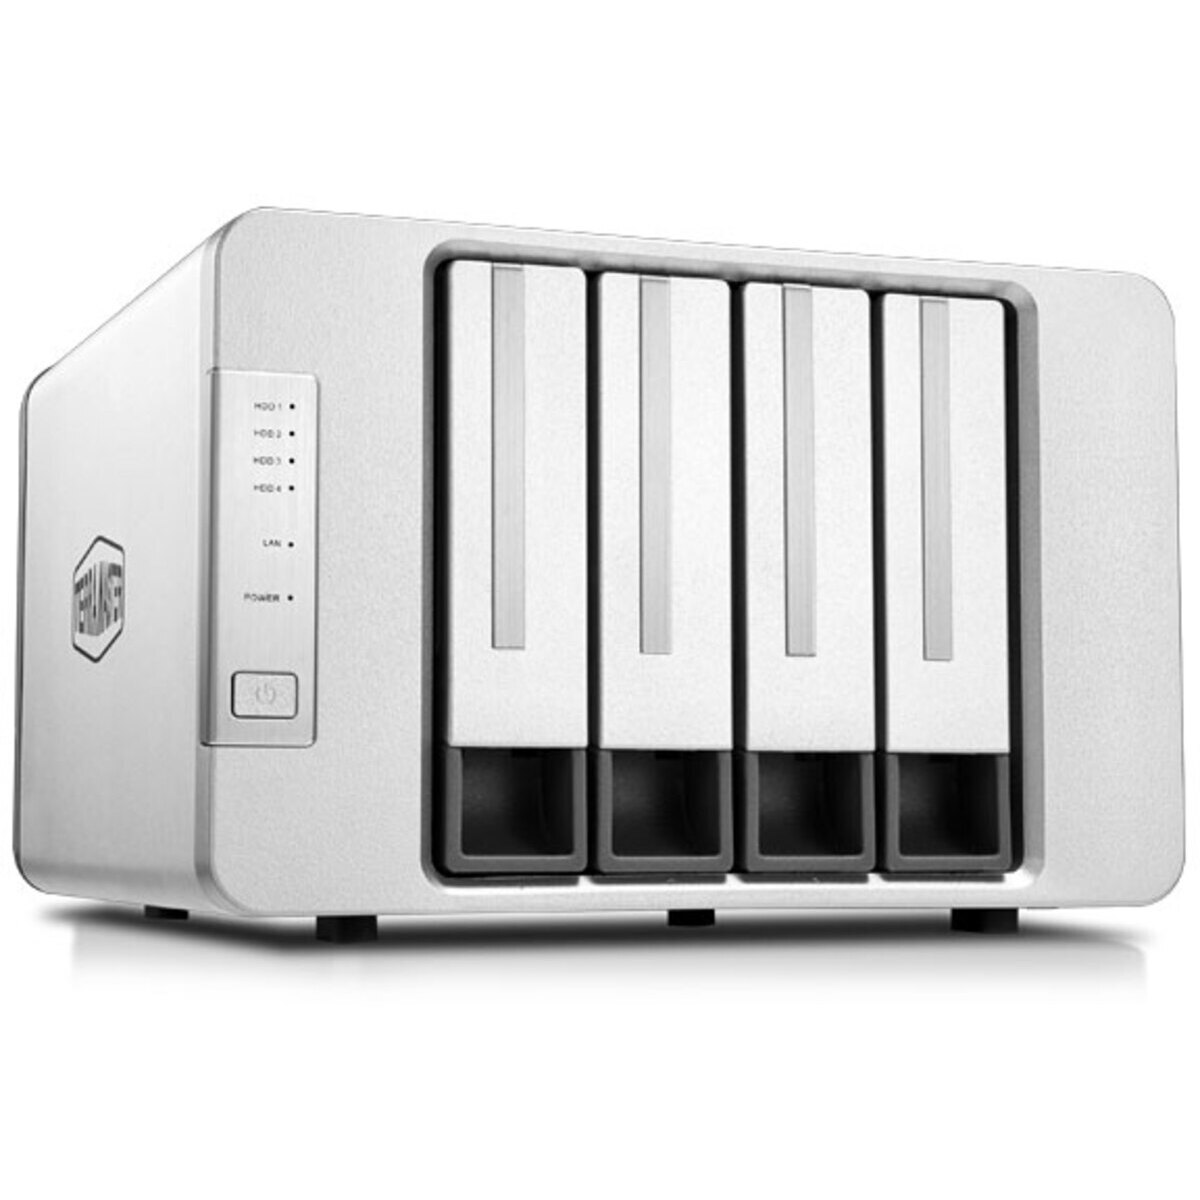 TerraMaster F4-223 4tb 4-Bay Desktop Personal / Basic Home / Small Office NAS - Network Attached Storage Device 2x2tb Western Digital Gold WD2005FBYZ 3.5 7200rpm SATA 6Gb/s HDD ENTERPRISE Class Drives Installed - Burn-In Tested - FREE RAM UPGRADE F4-223